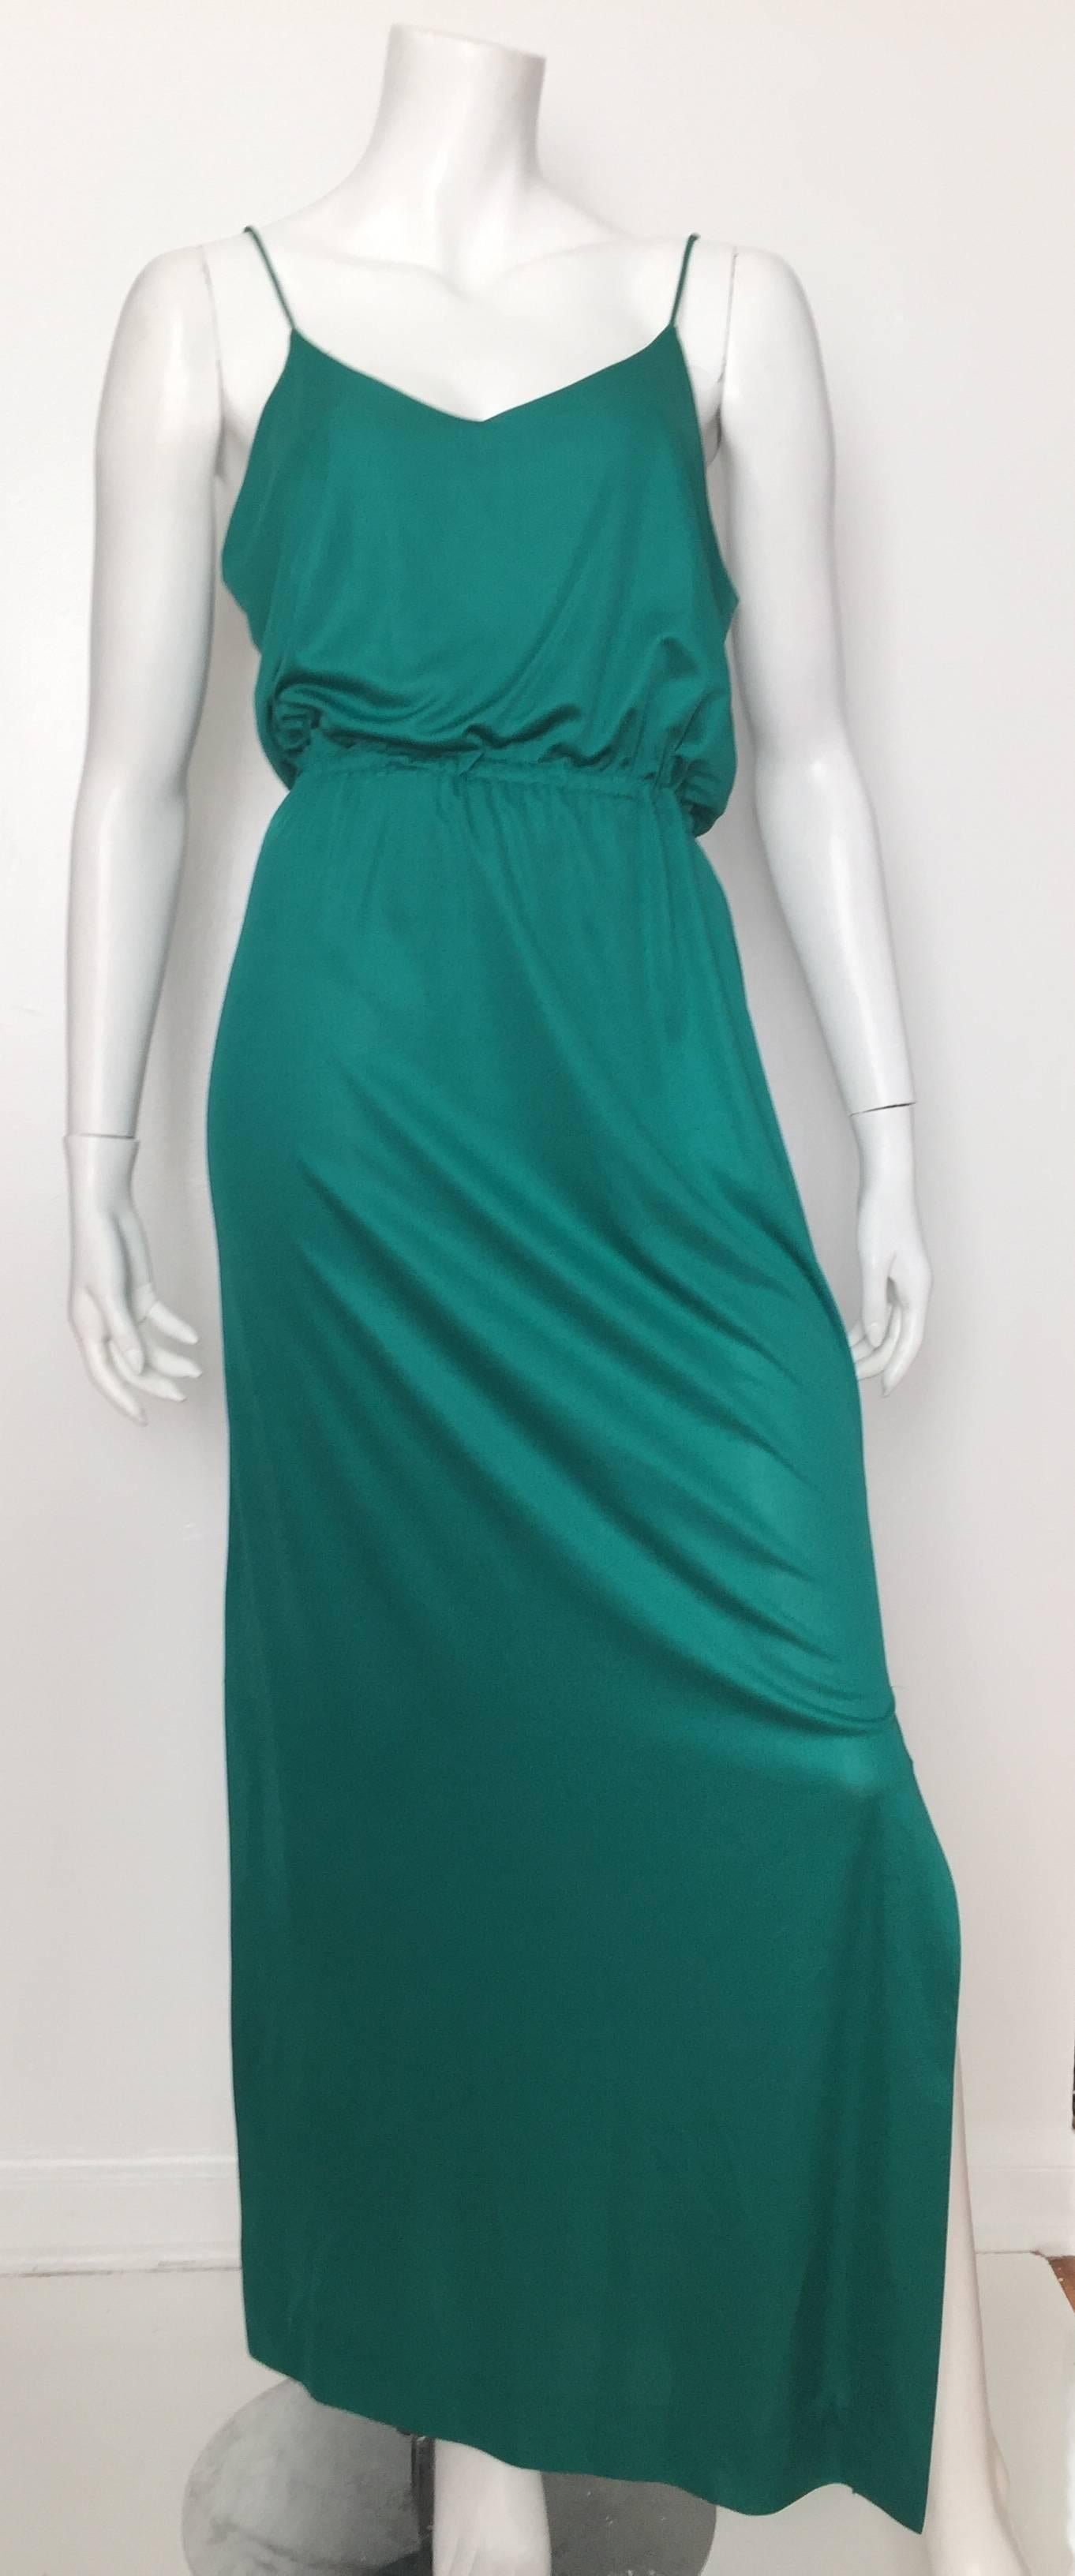 I.Magnin 1970s maxi emerald green spaghetti string dress and elastic waistband has matching dolman sleeves jacket will fit sizes 4 but please see & use measurements below so you know for certain this will fit you the way the paparazzi wants it